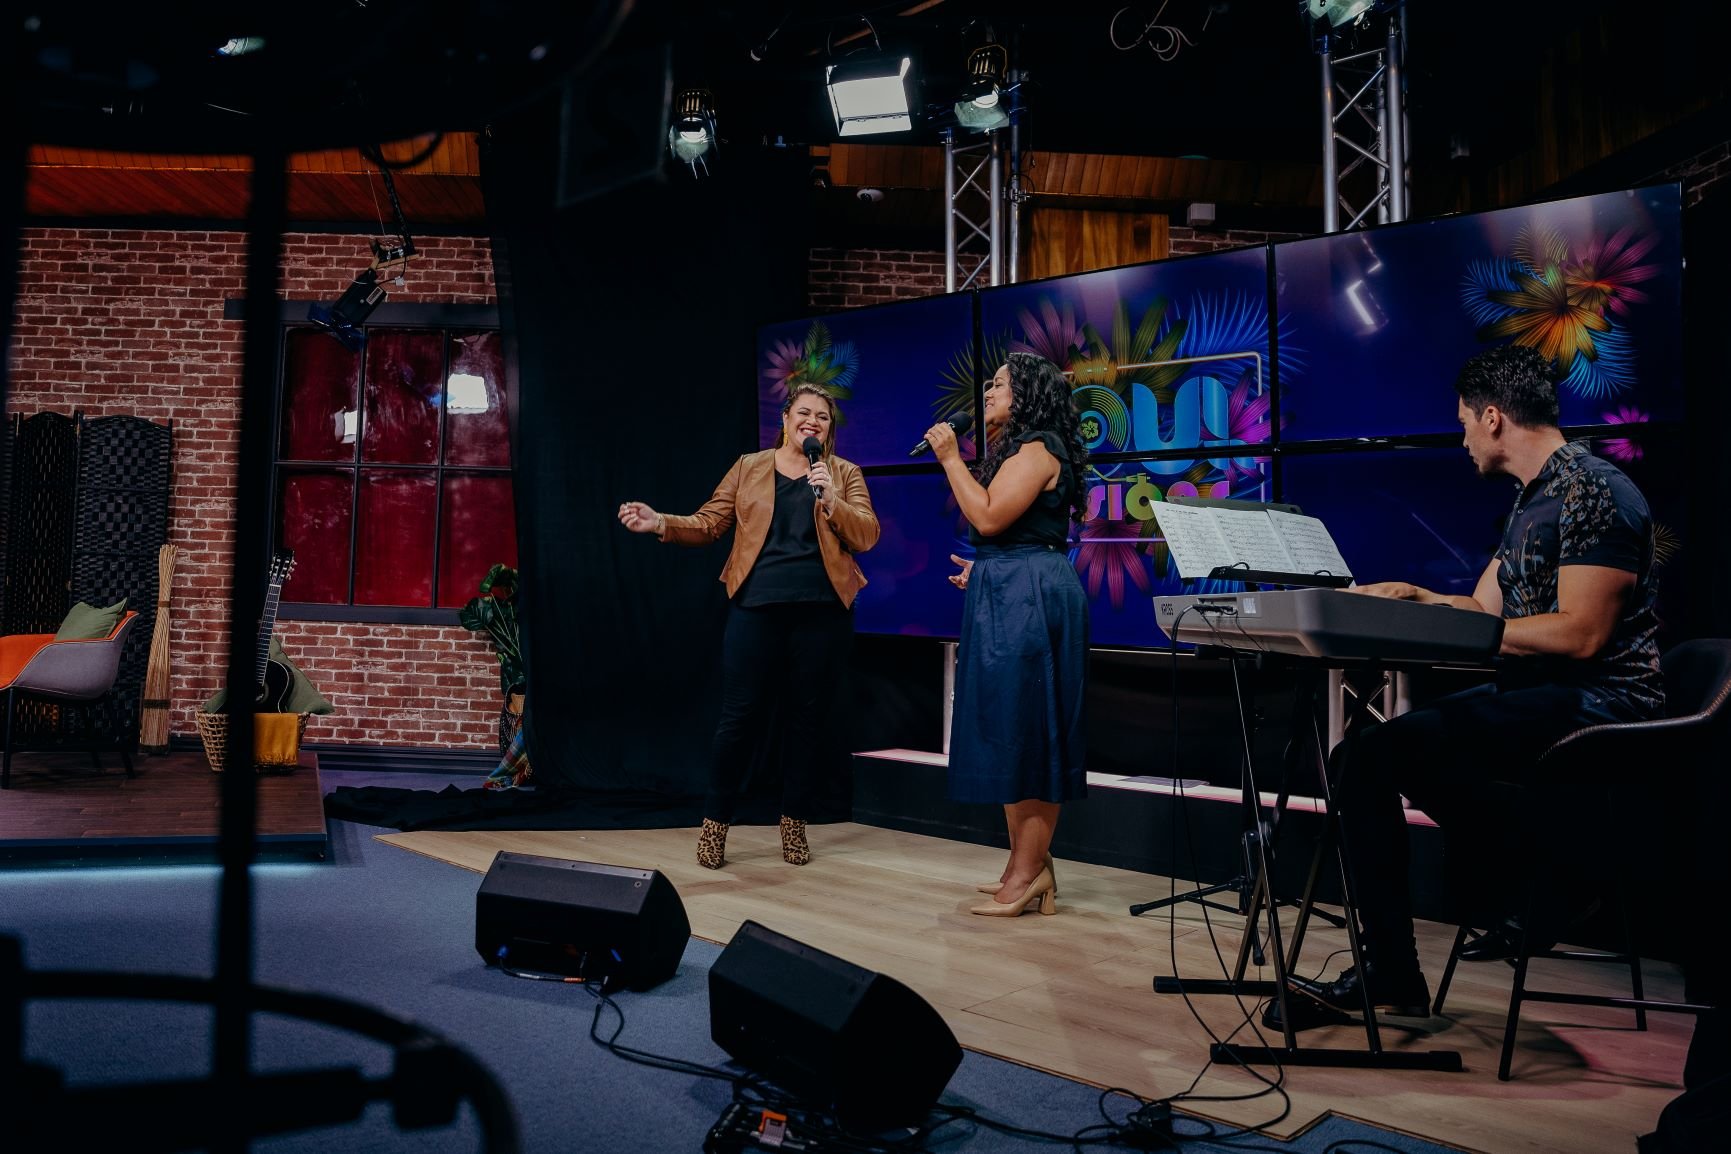 Sara Jane and Indira Stewart team up for a moving rendition of 'His Eye Is On The Sparrow'. Photo: Soul Sessions